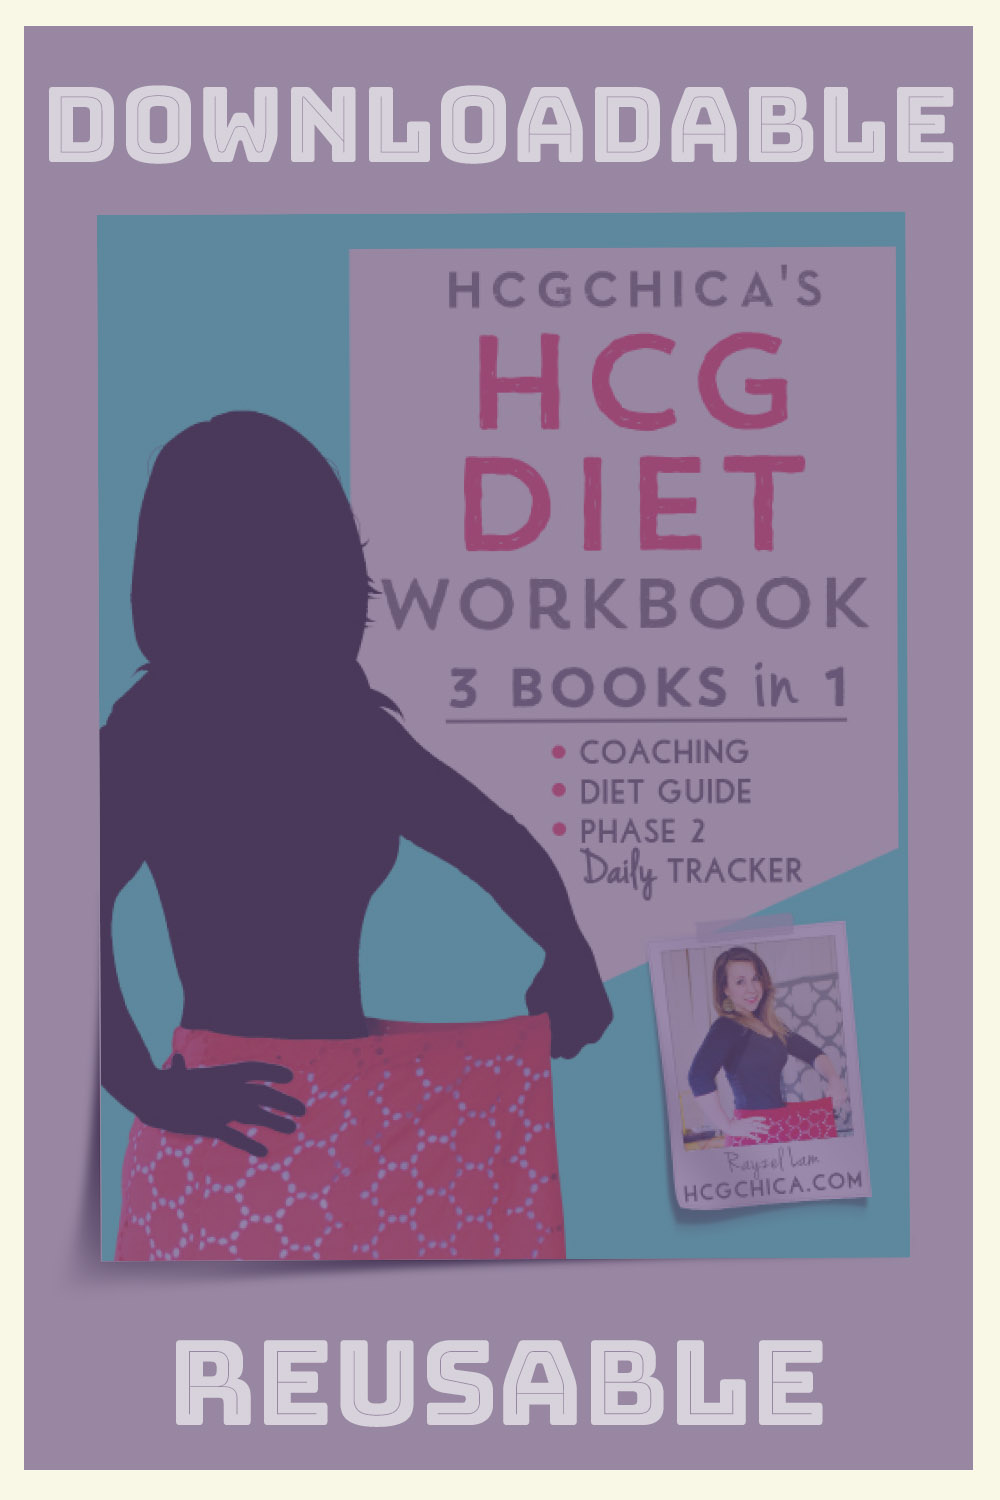 hCG Diet Workbook - Printable Reusable Downloadable Journal - Diet Guide, Coaching, Phase 2 Daily Tracker